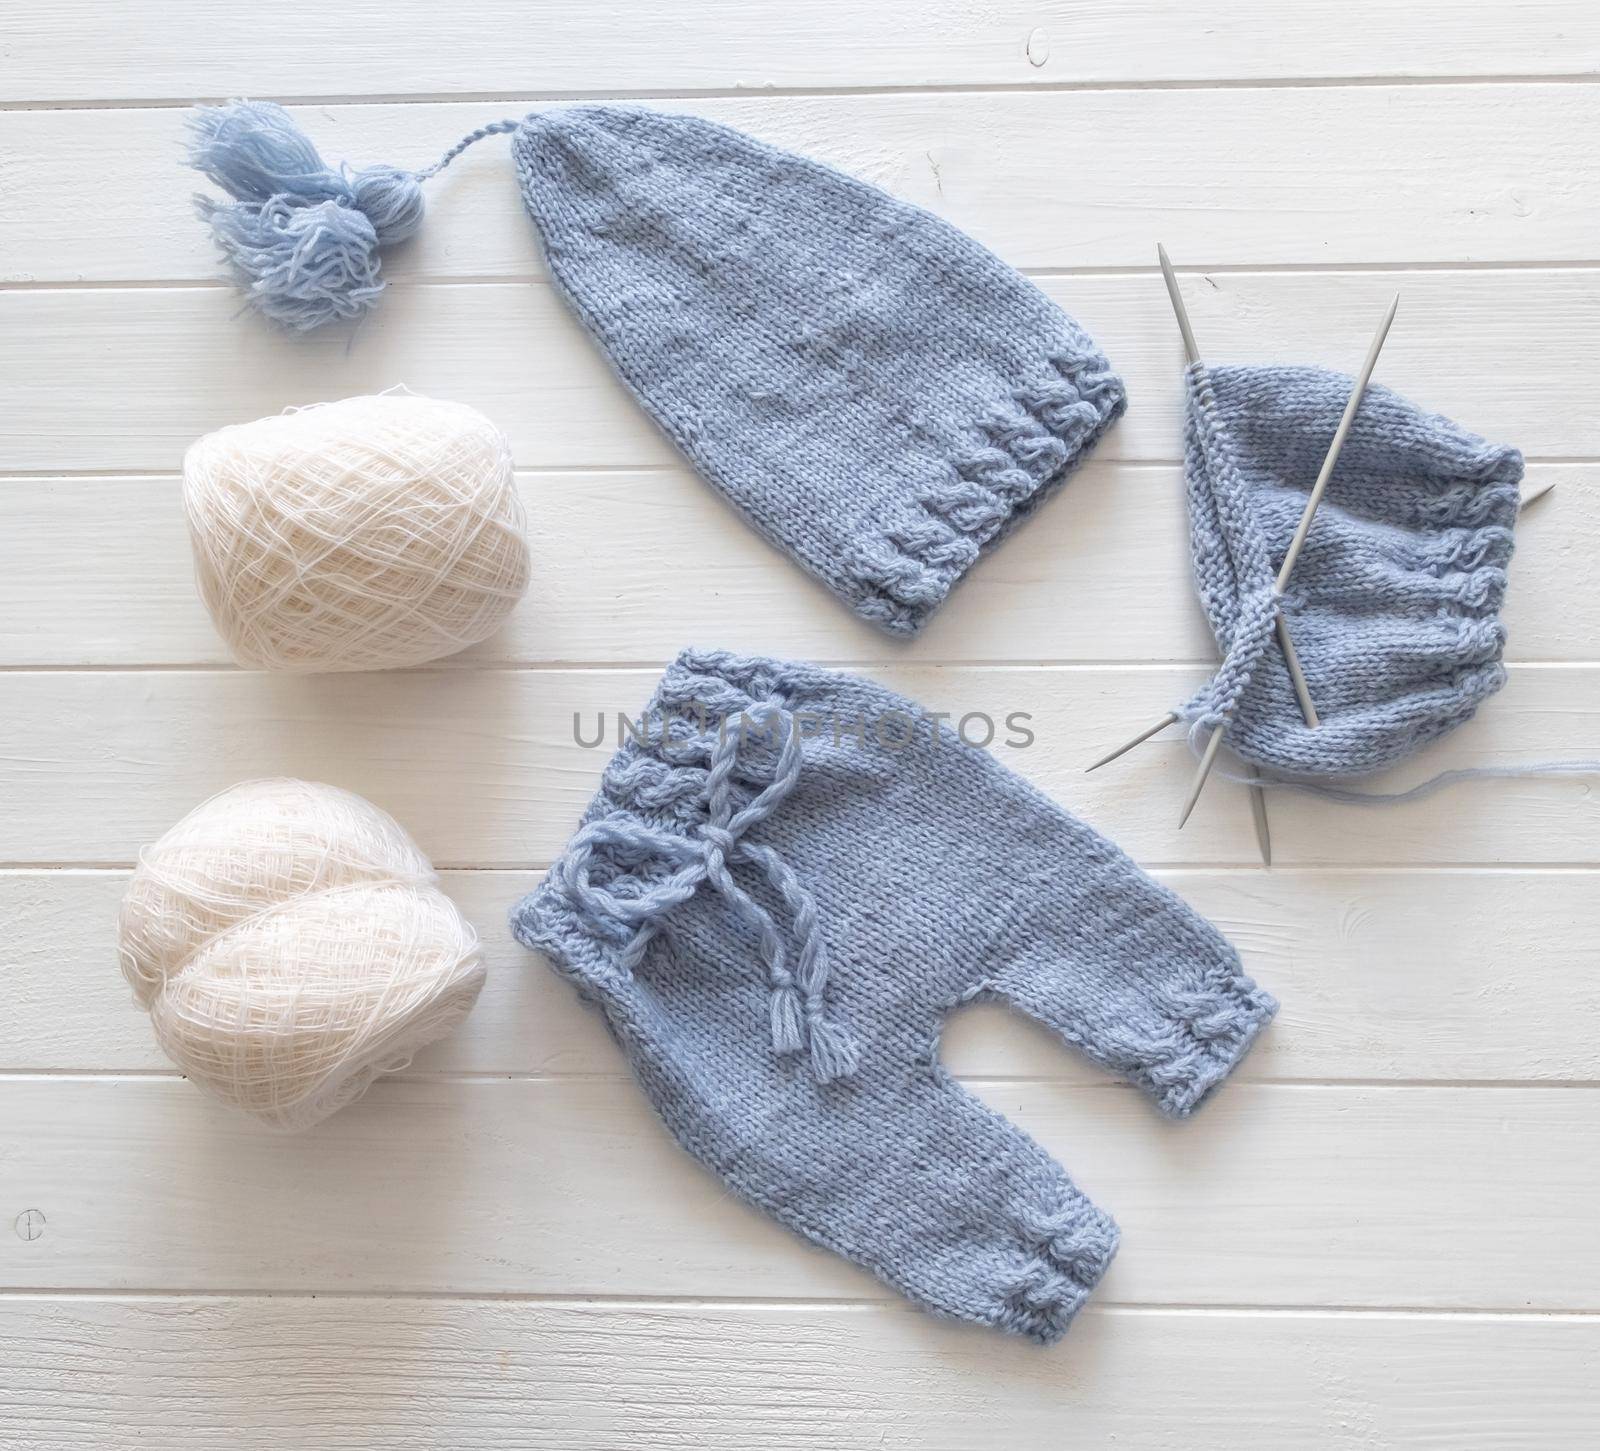 Blue knitted baby clothes with white knitting yarns composed on the white table